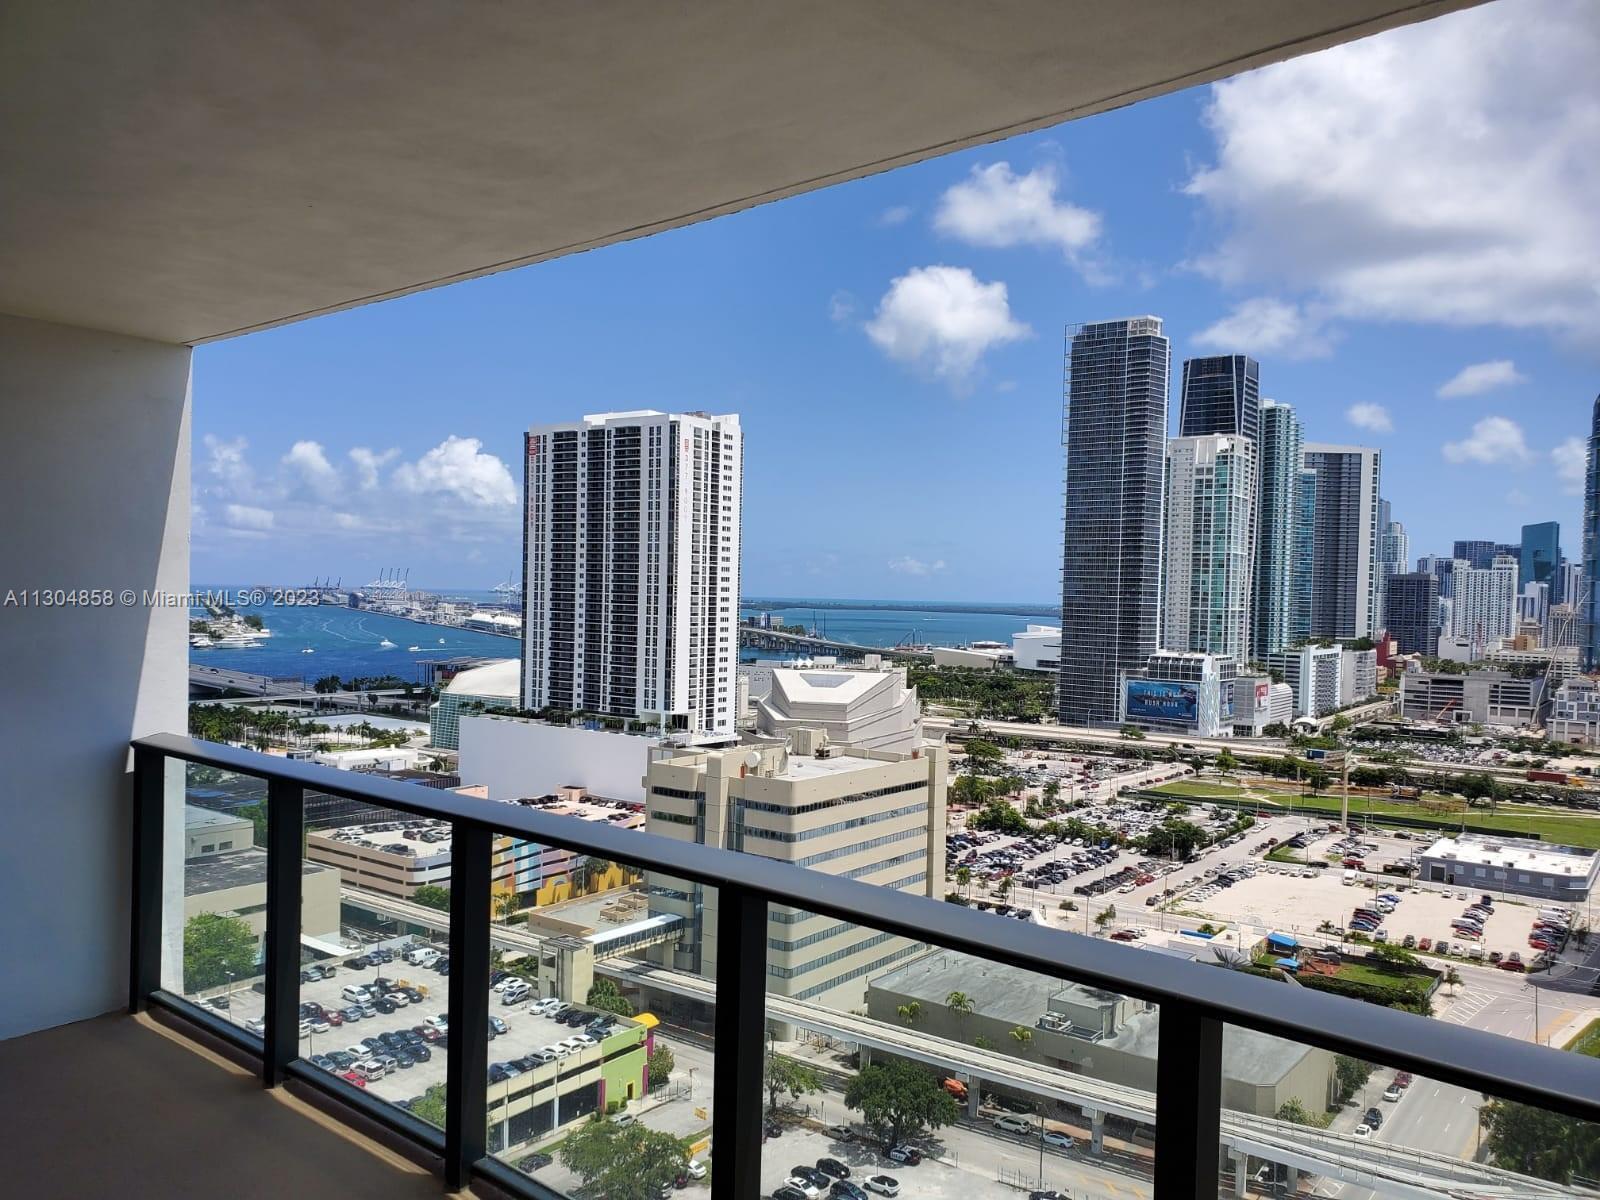 Extraordinary New 2BR/2BA Apartment with MIAMI Skyline Views on EXCLUSIVE "CANVAS".
Local transport